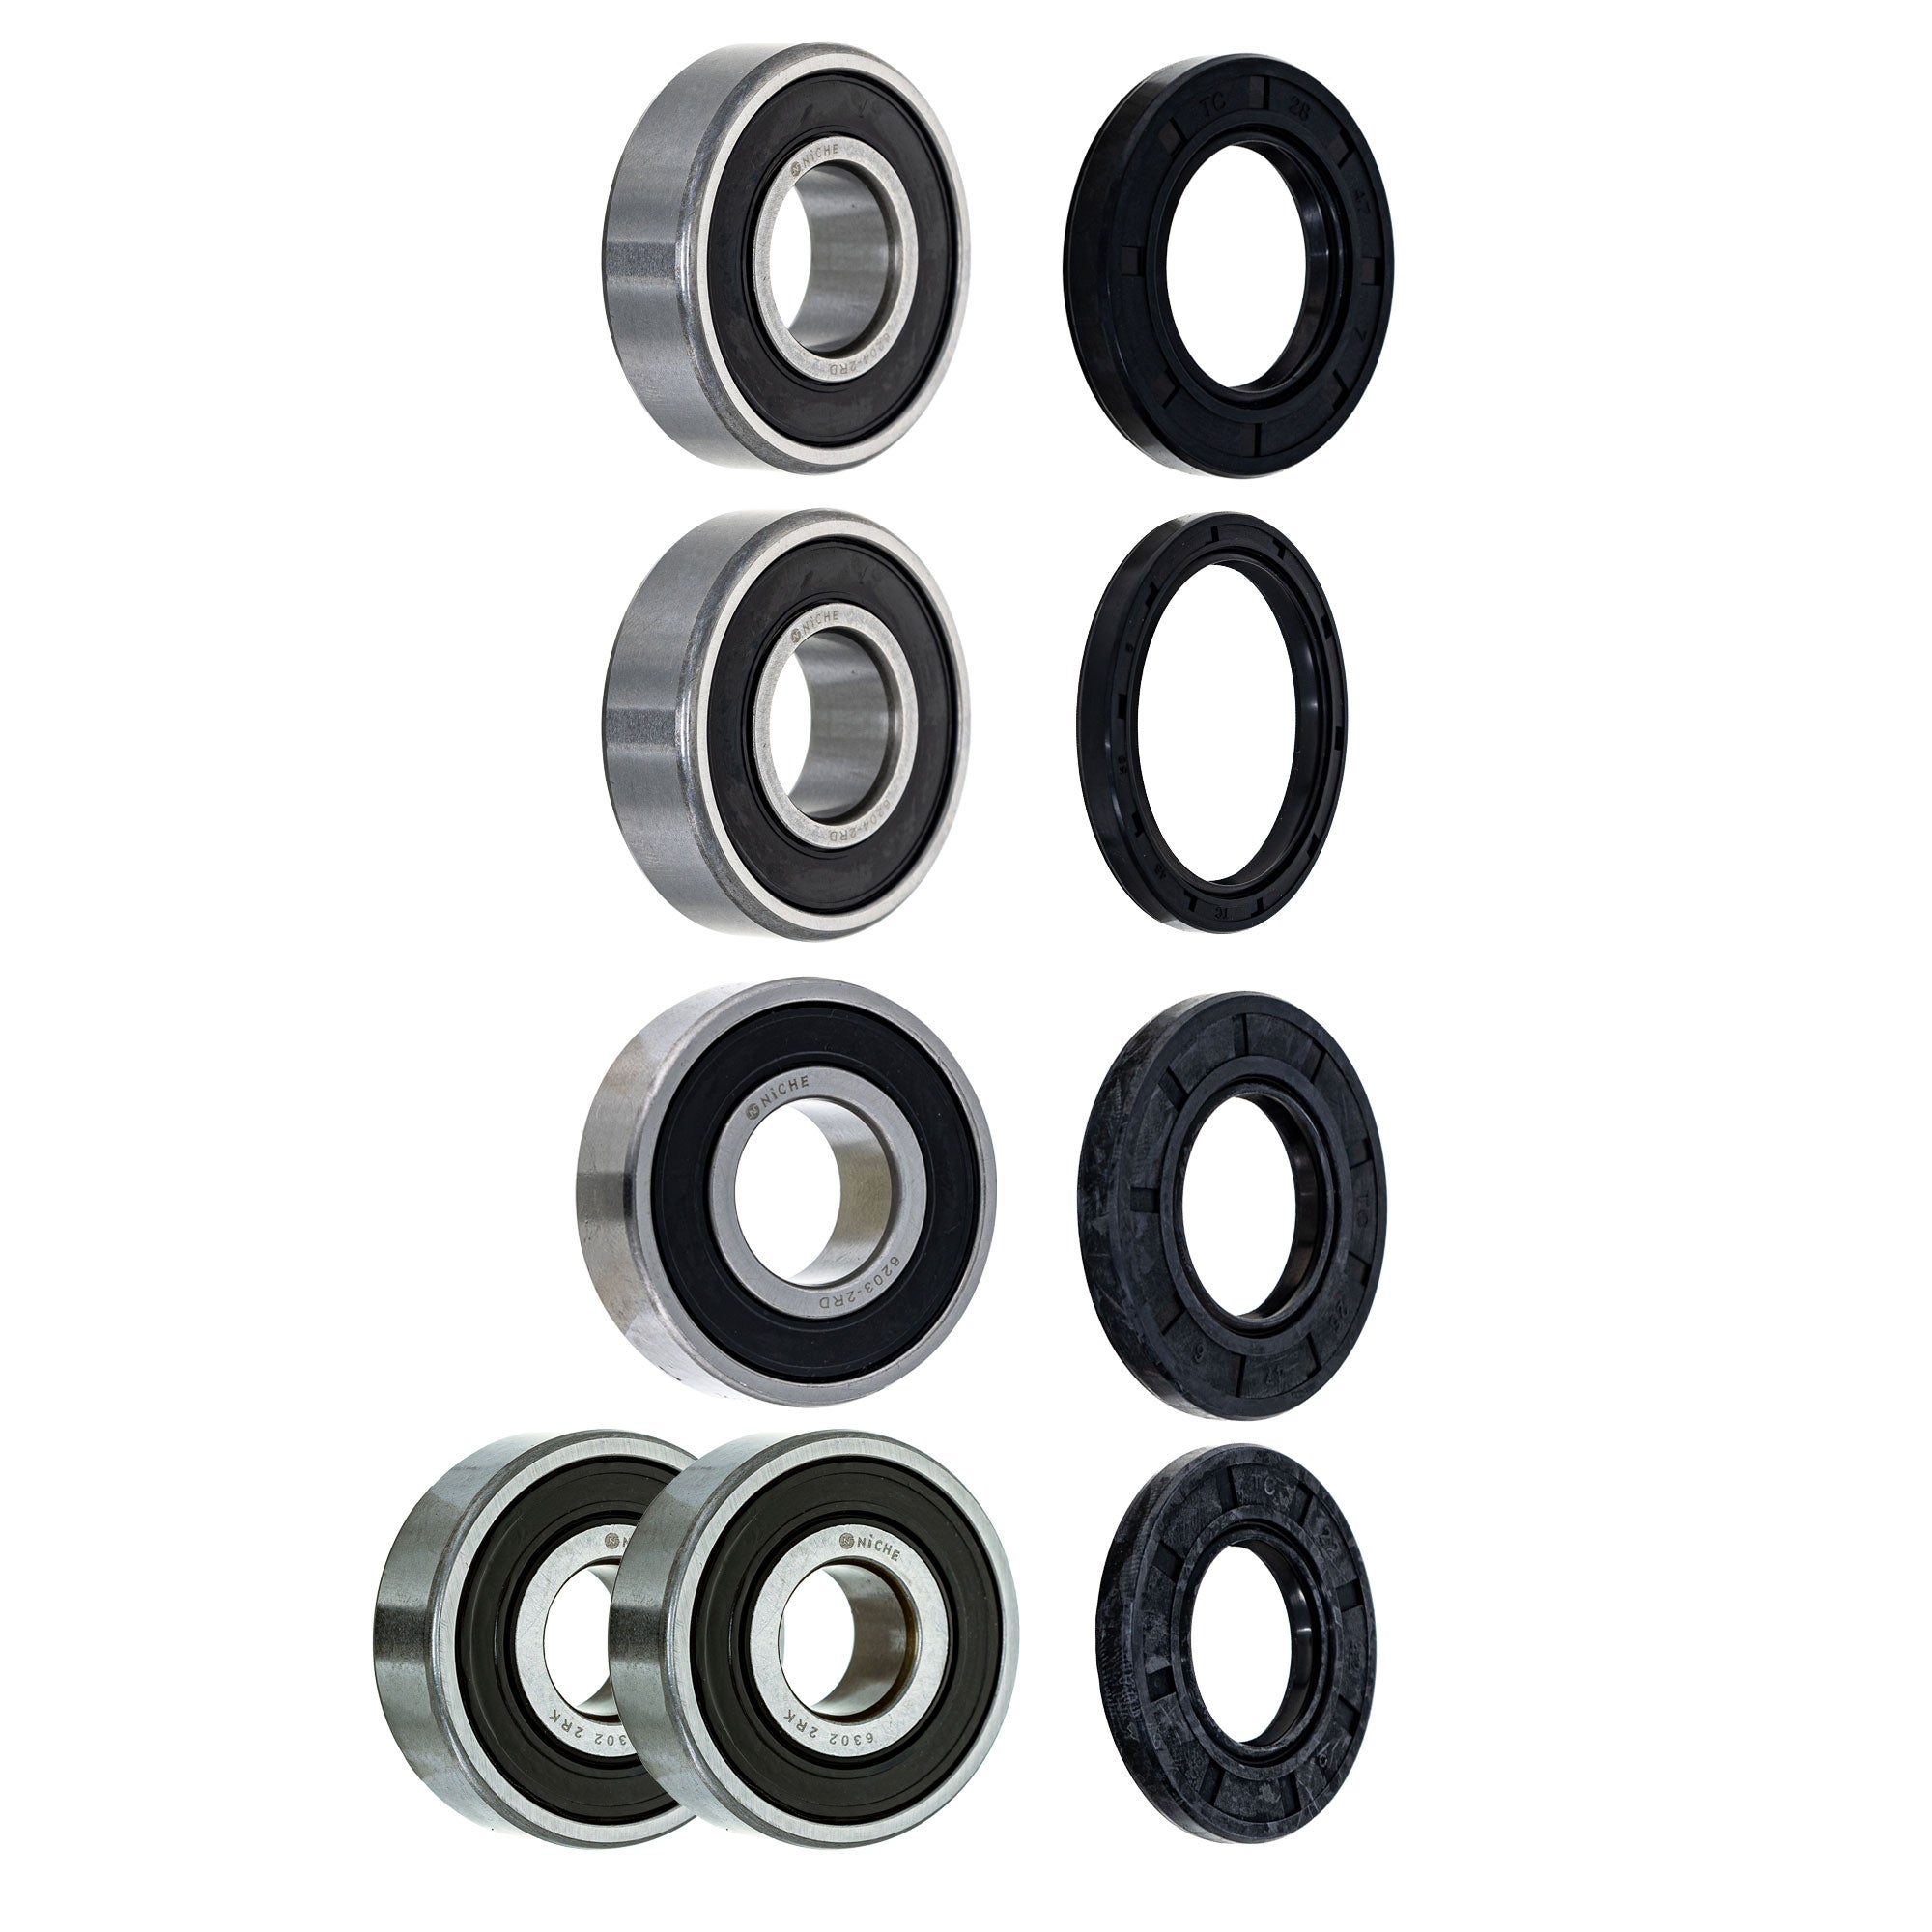 Wheel Bearing Seal Kit for zOTHER FZR400 NICHE MK1008634